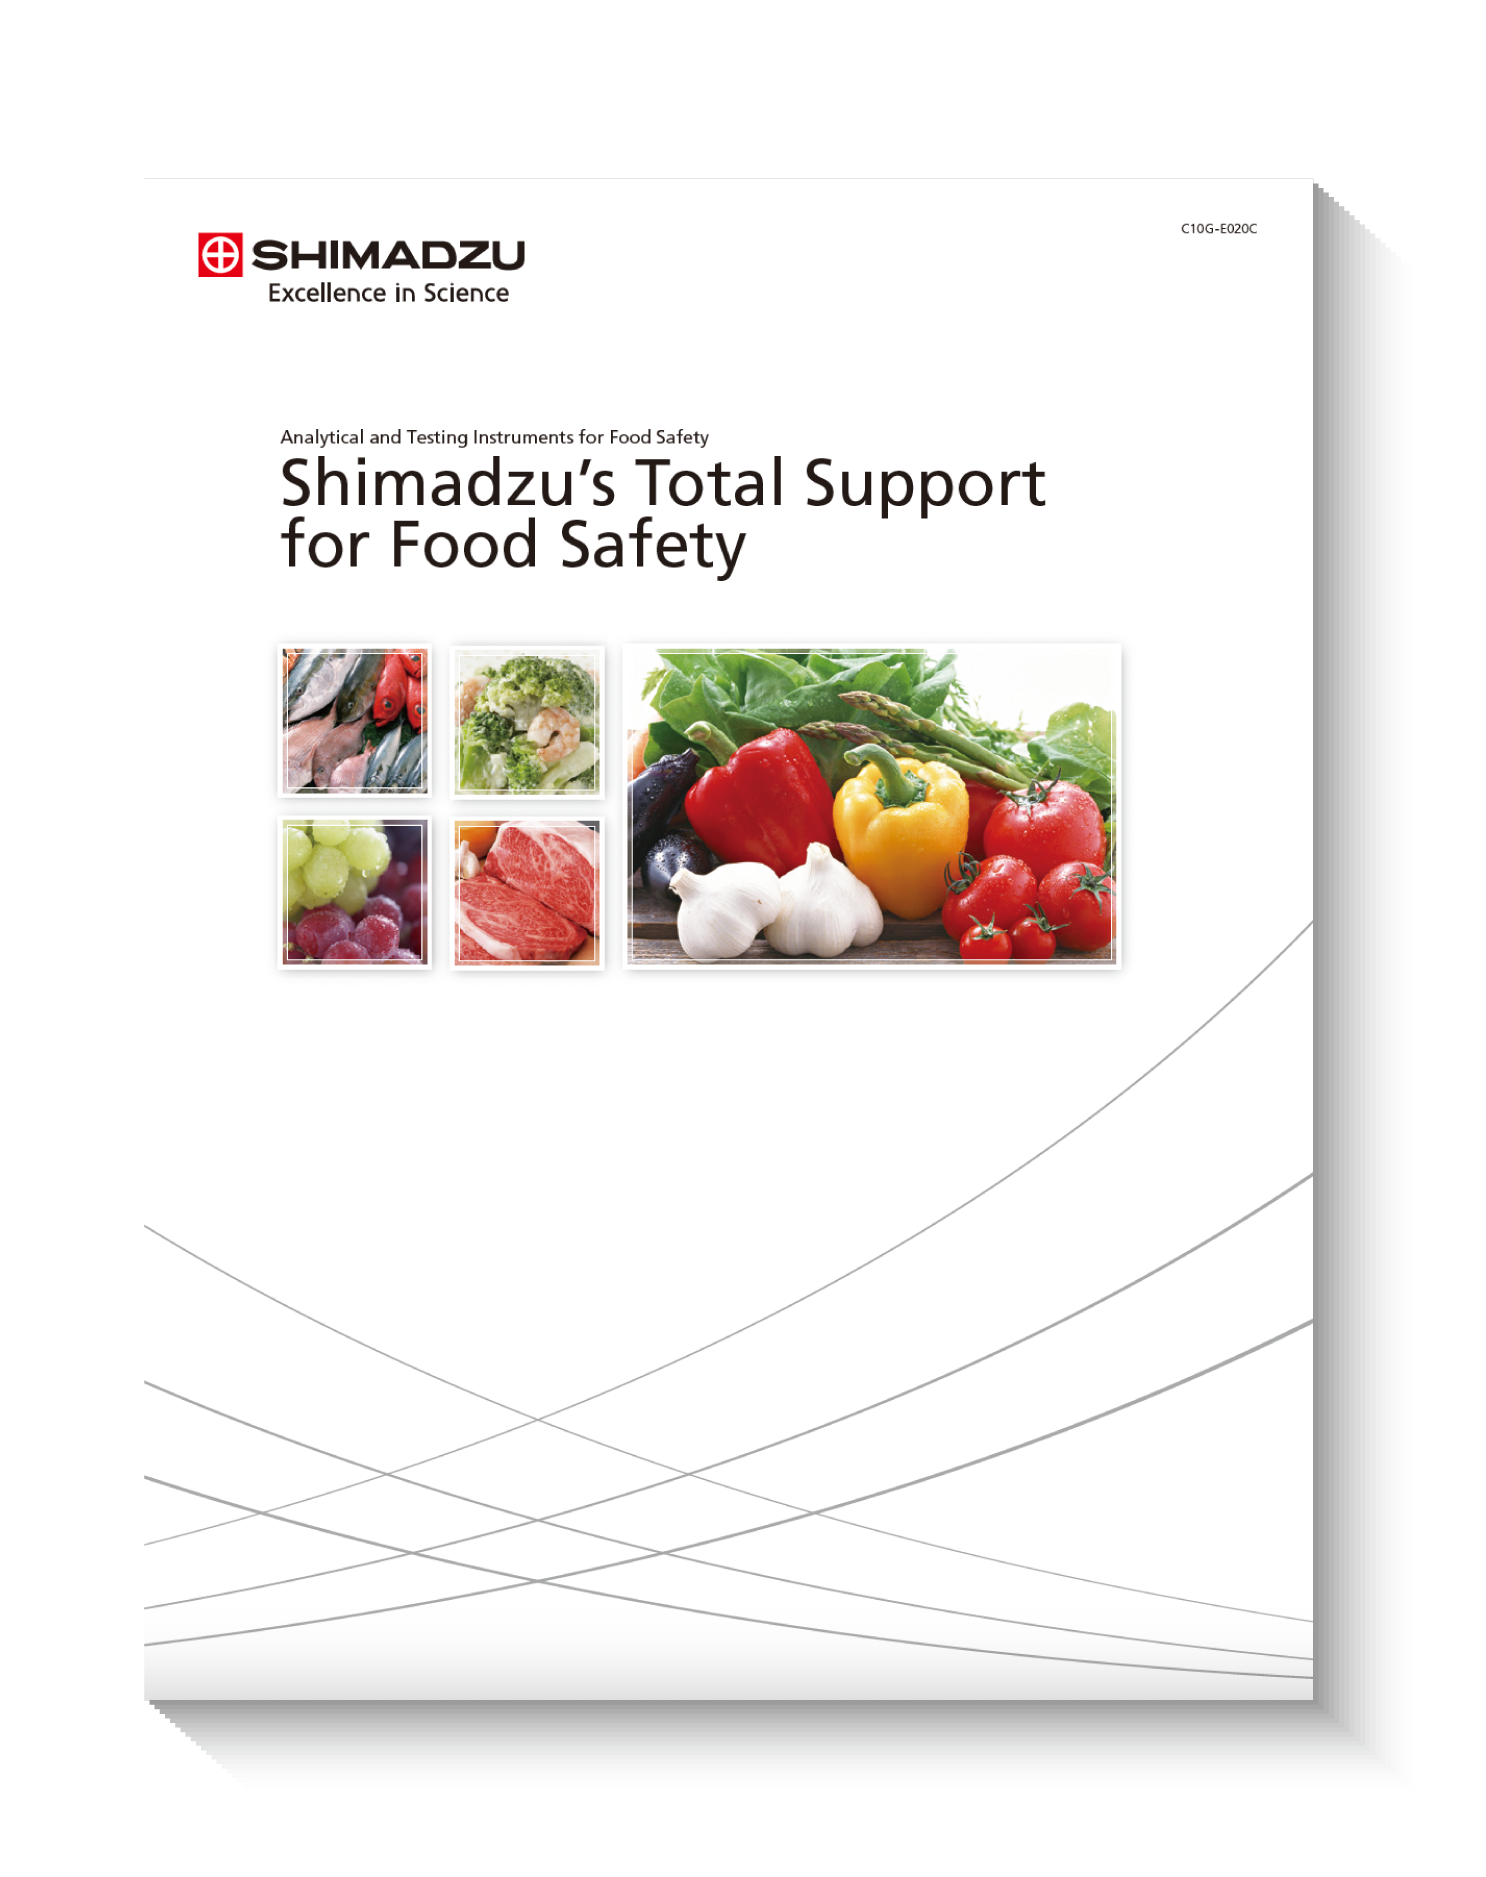 Shimadzu's Total Support for Food Safety